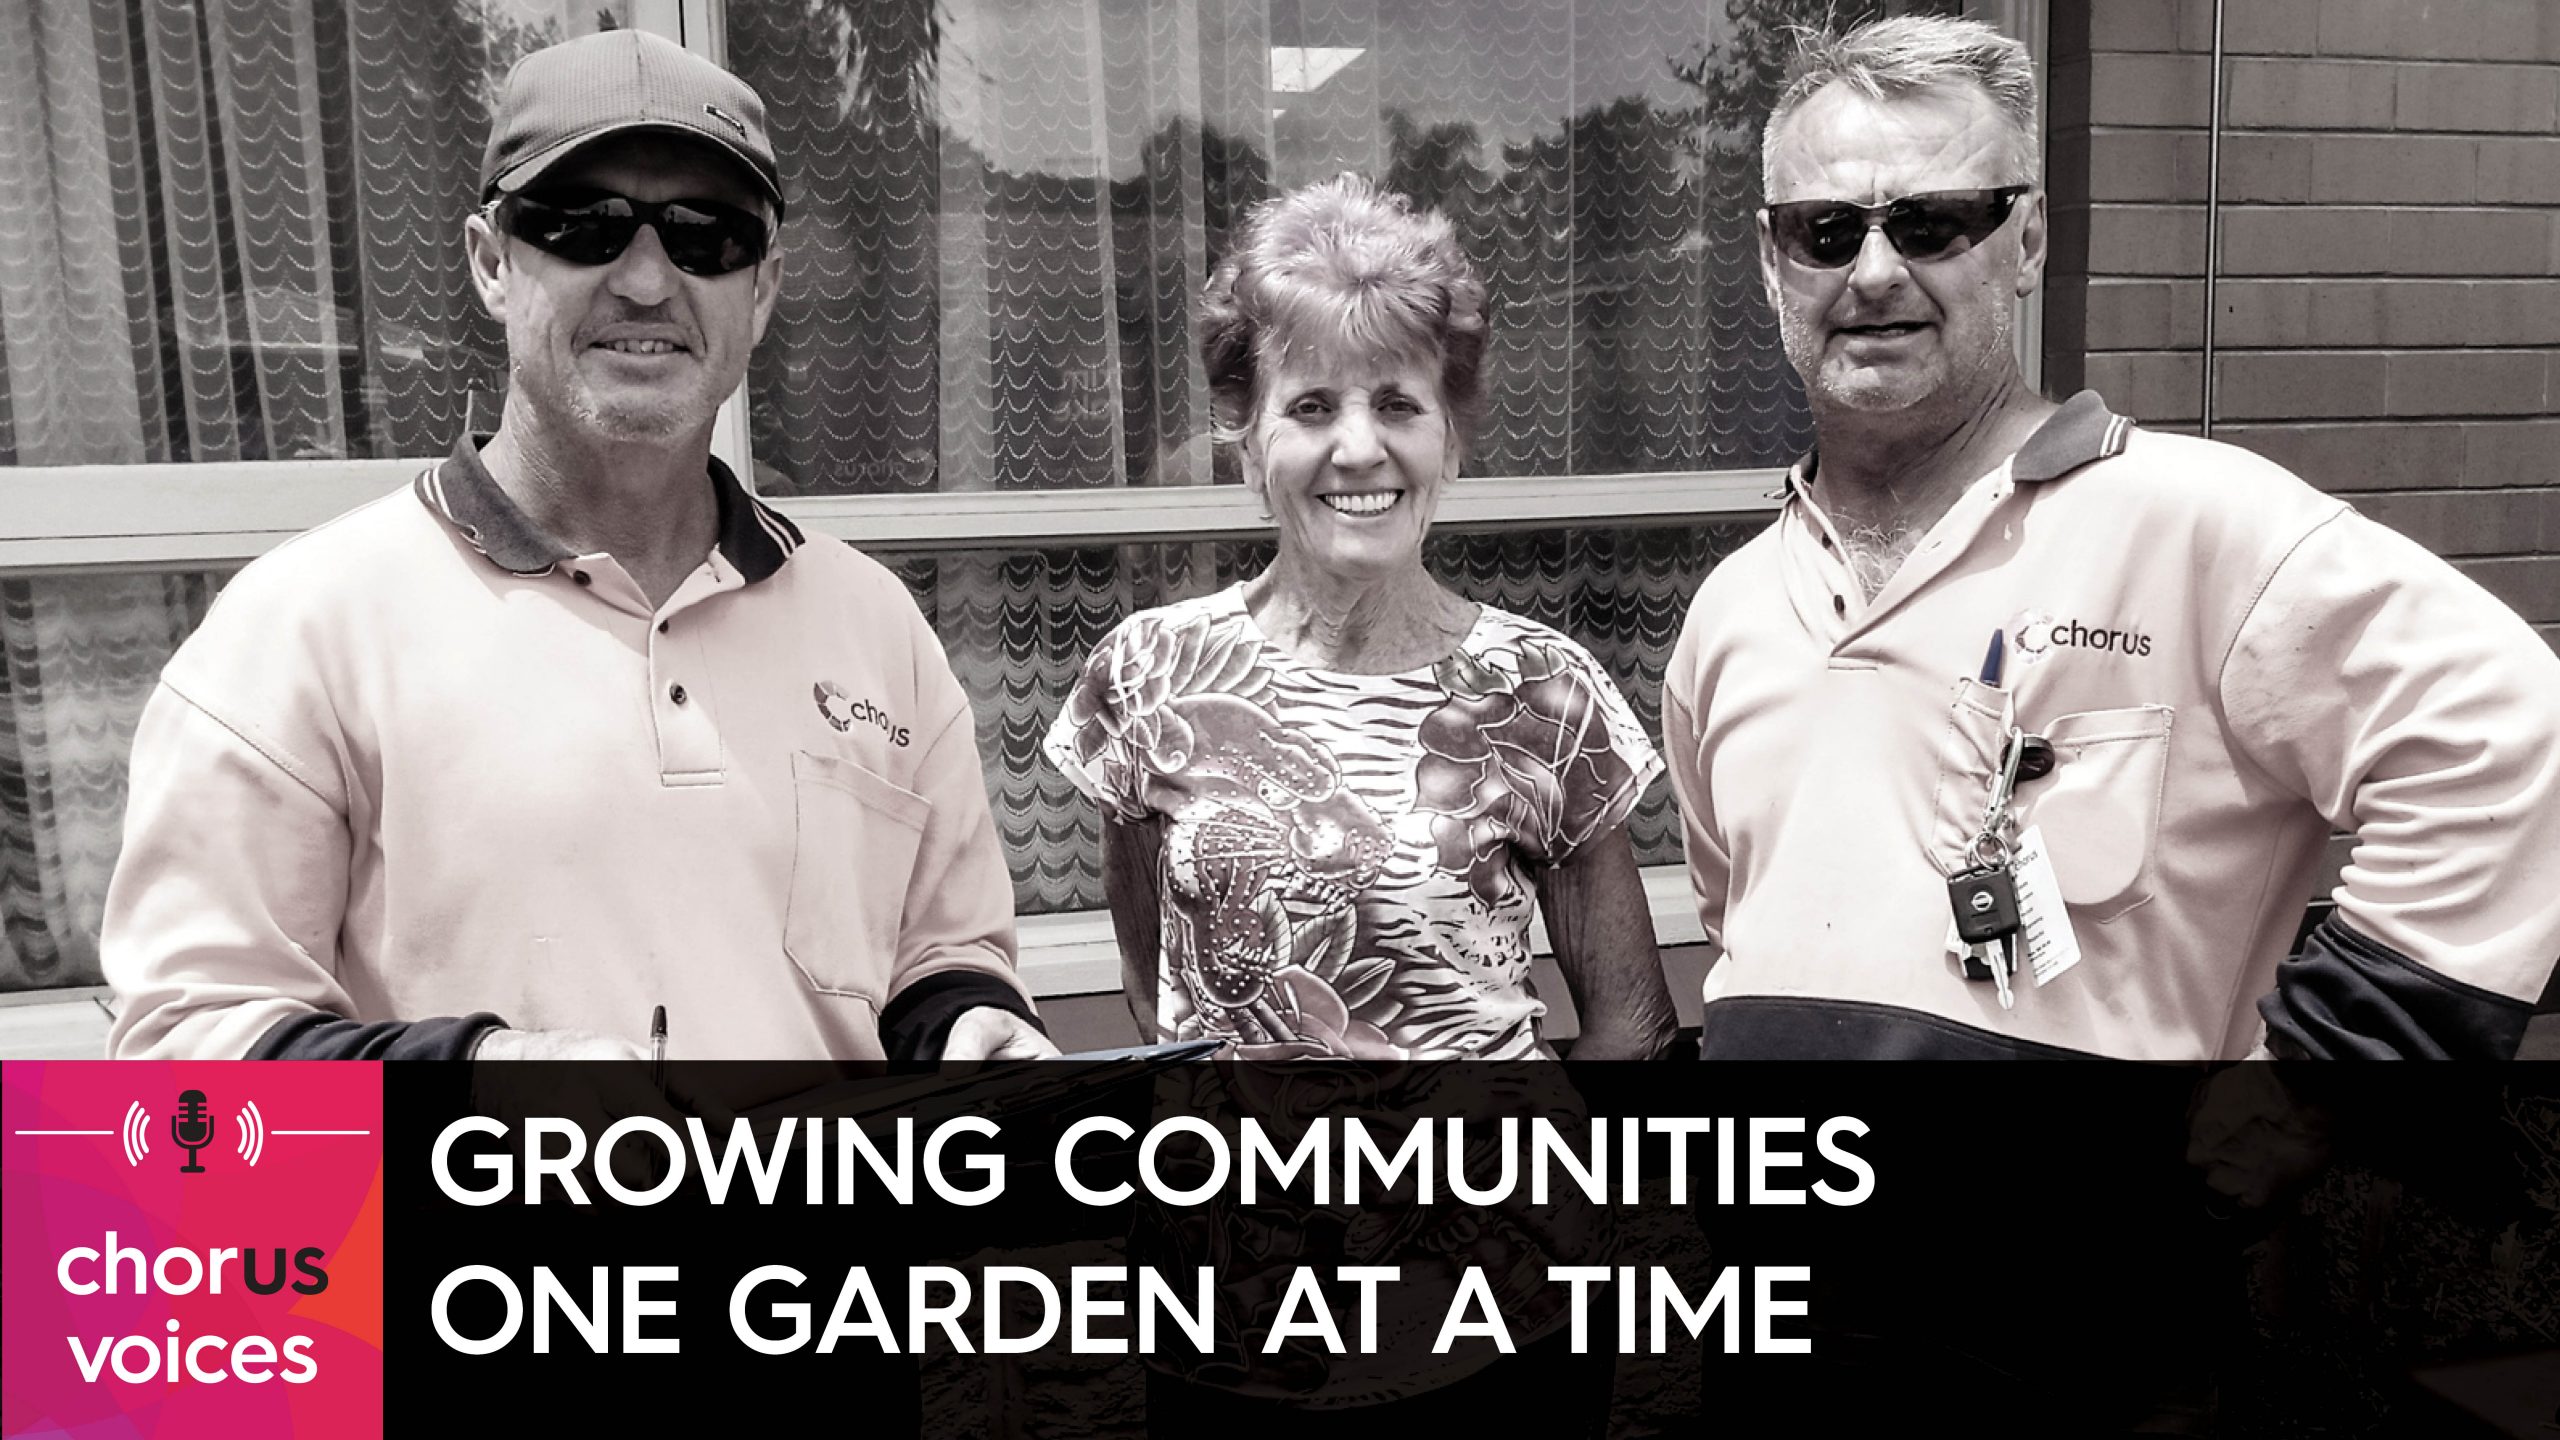 Growing communities one garden at a time